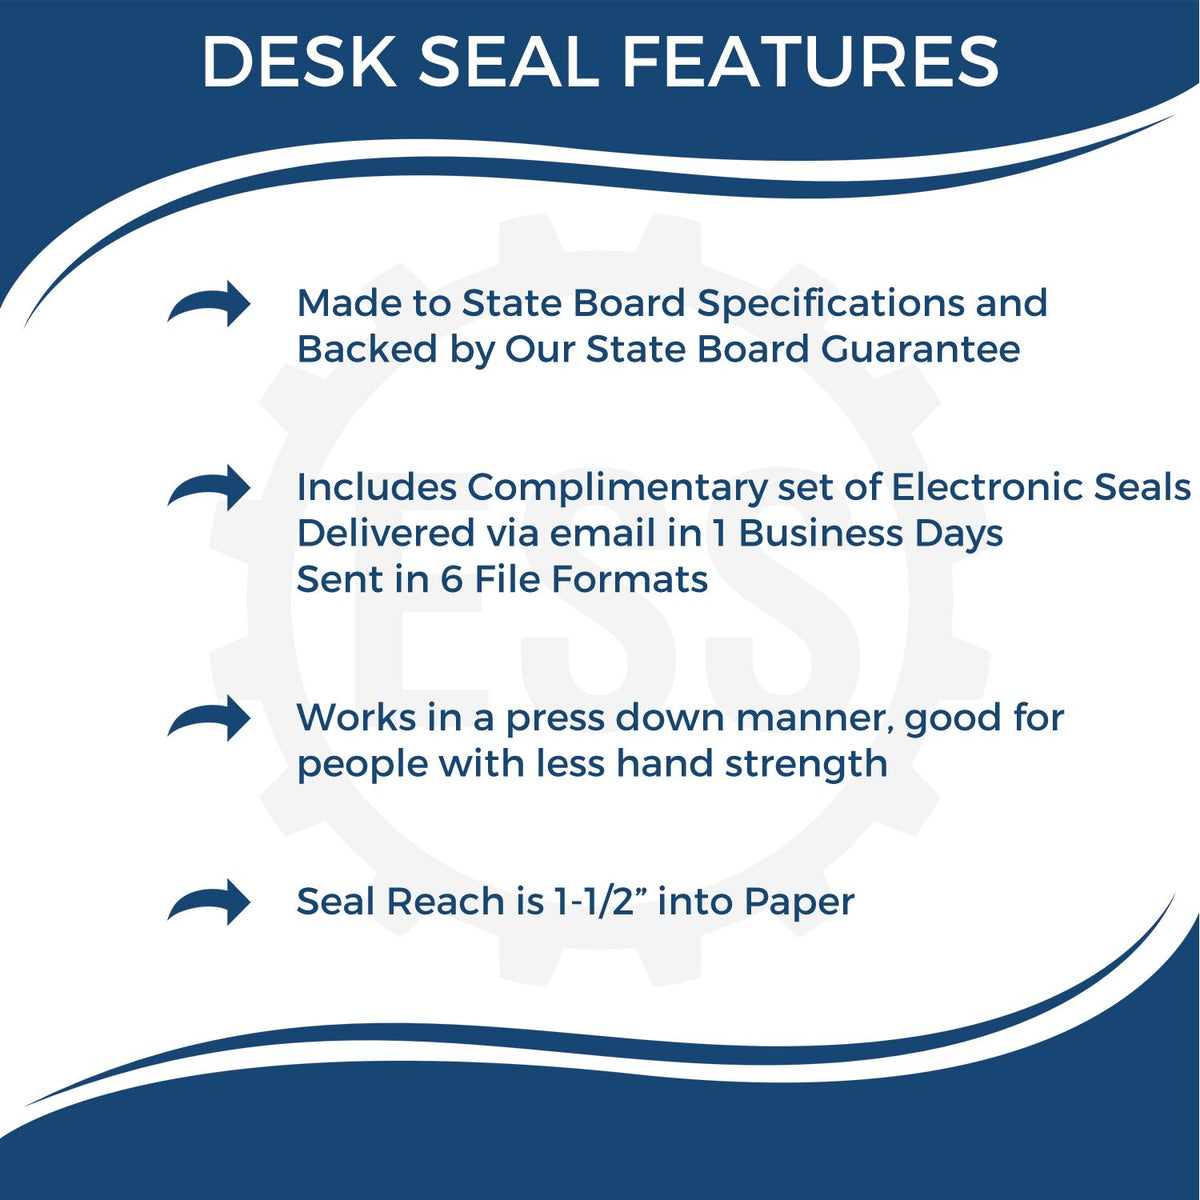 A picture of an infographic highlighting the selling points for the Massachusetts Engineer Desk Seal